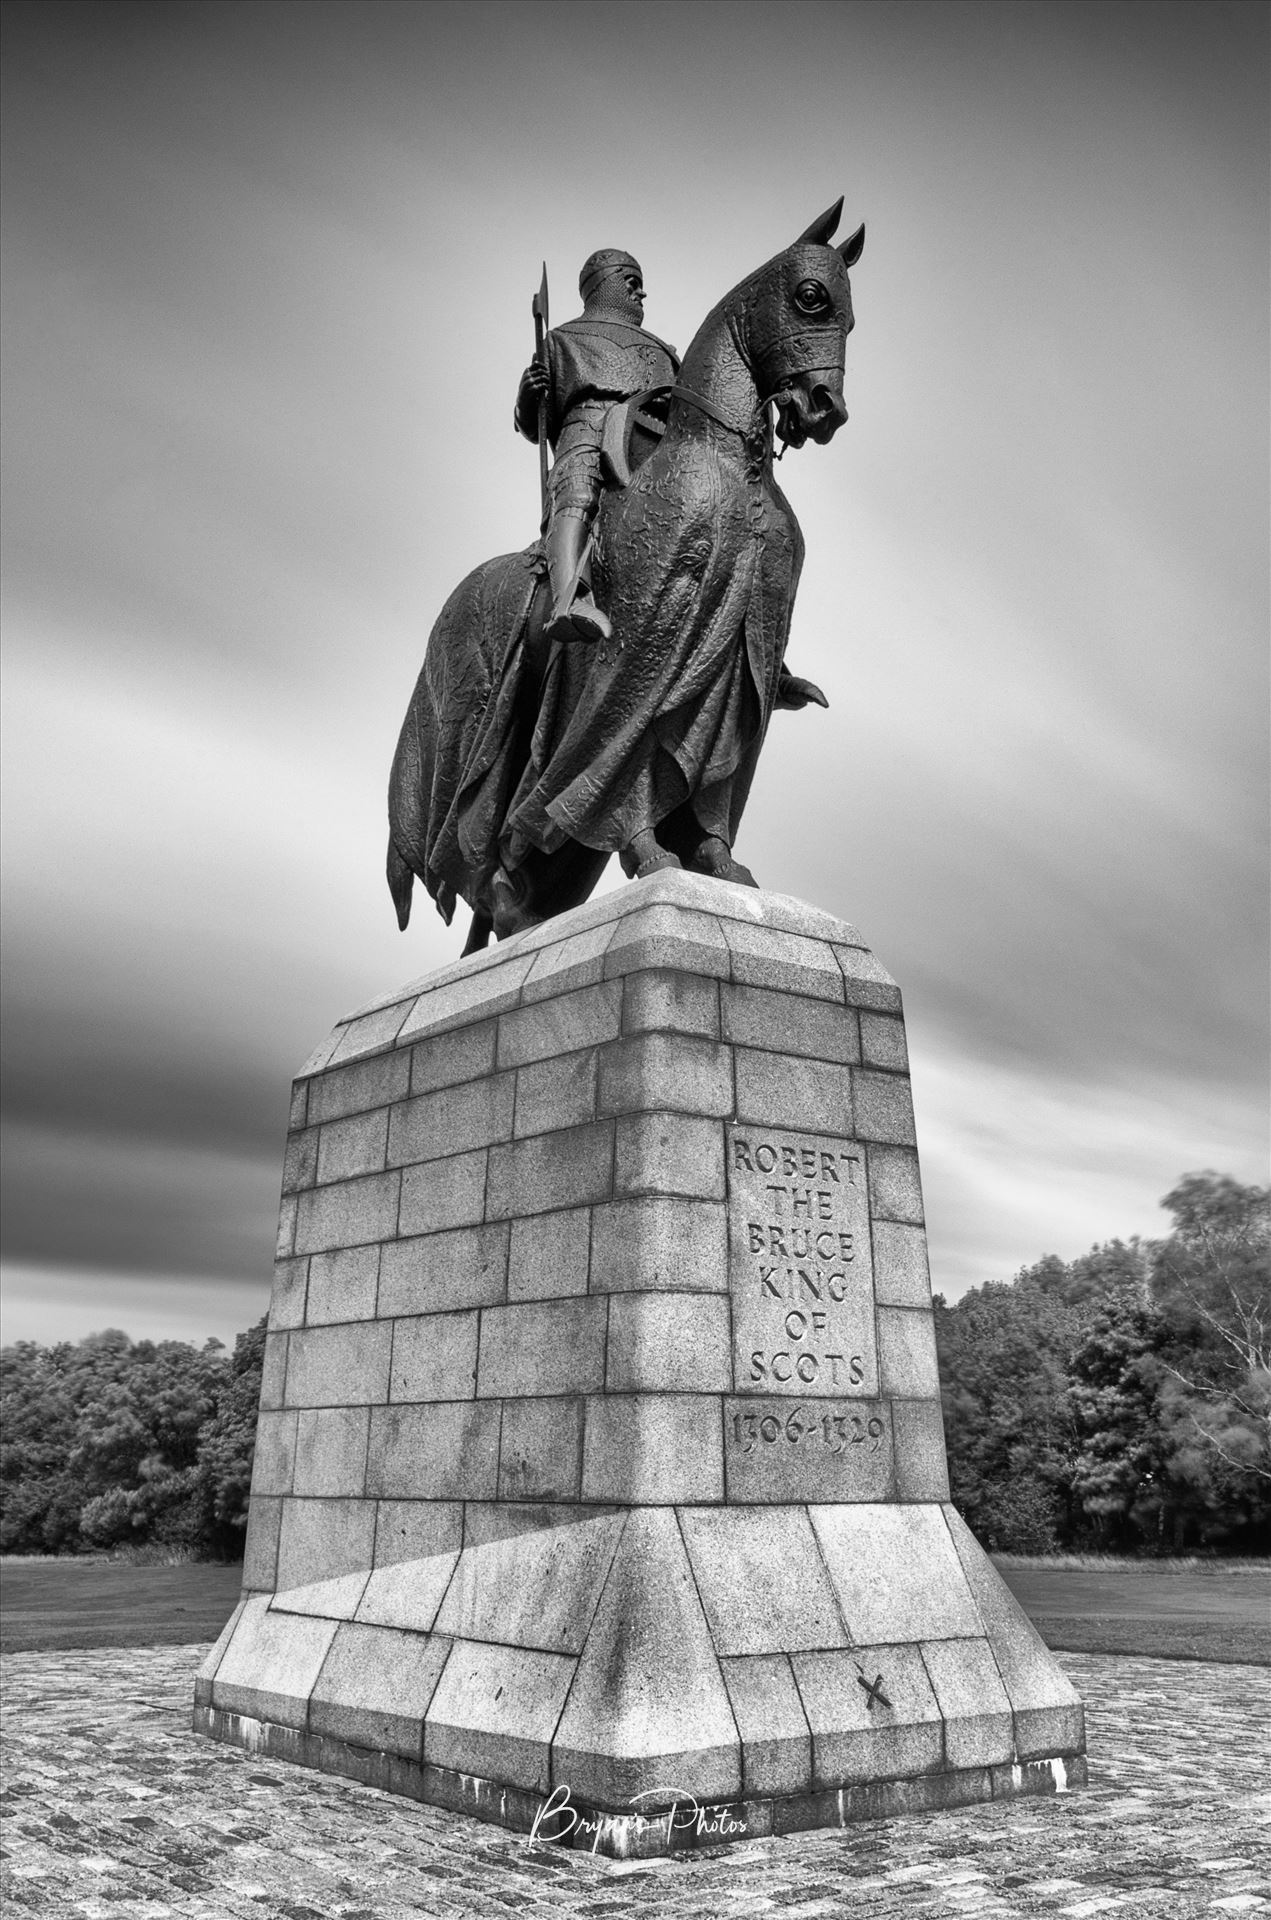 Robert the Bruce A black and white long exposure photograph of the King Robert the Bruce Statue taken at the Battle of Bannockburn memorial site. by Bryans Photos